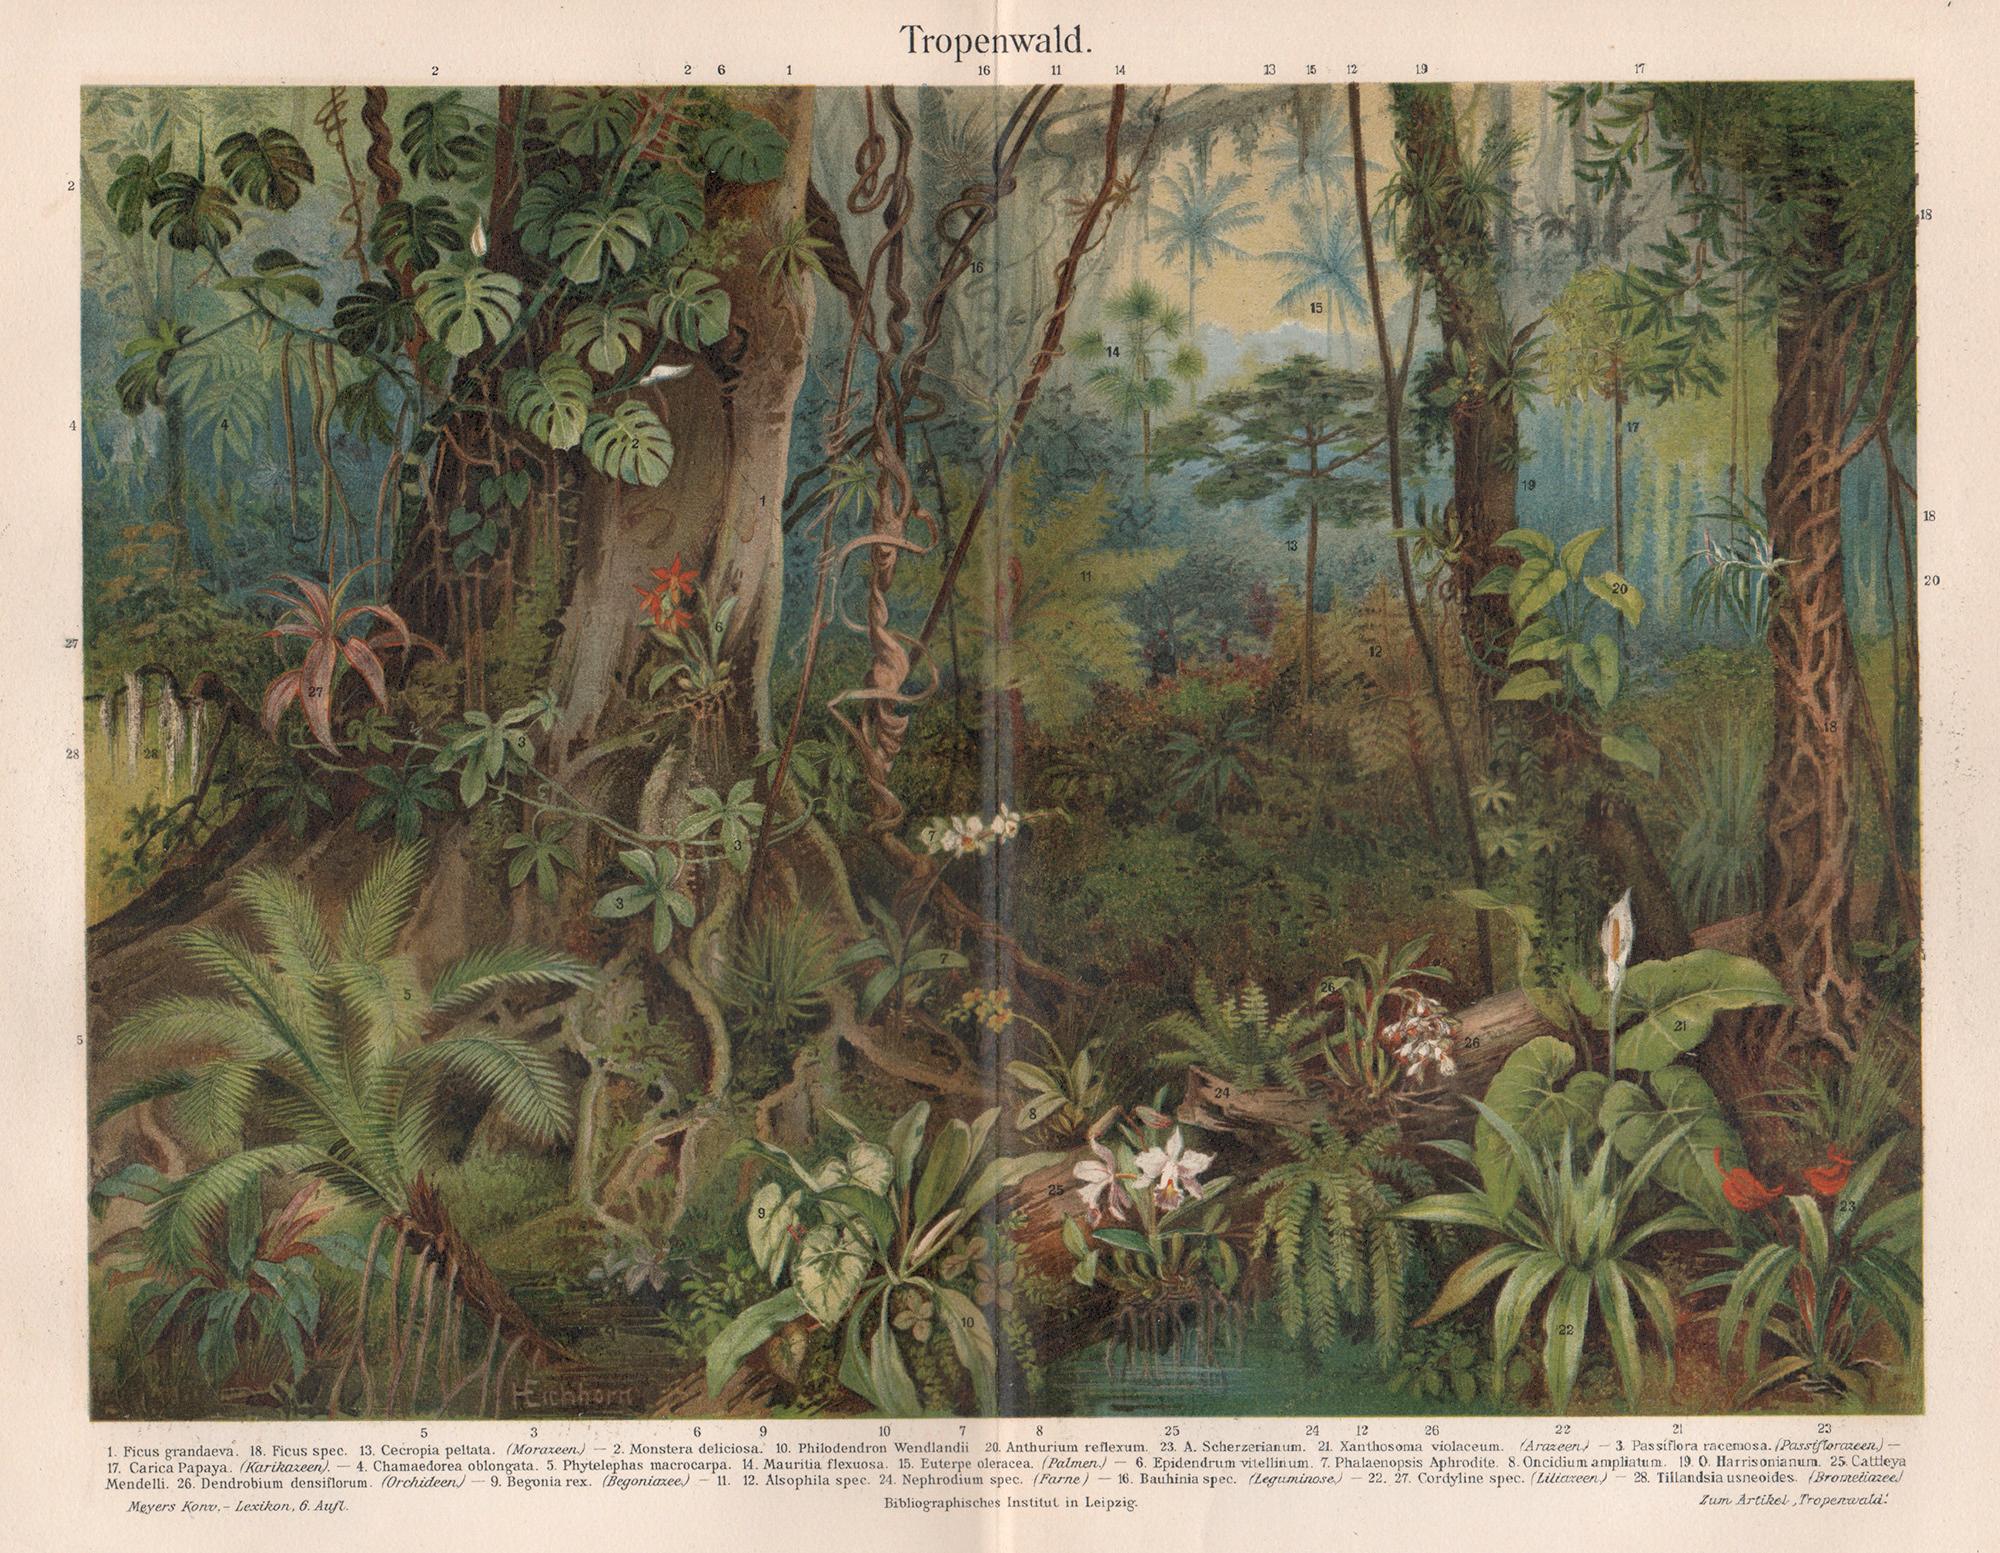 Unknown Still-Life Print - Tropenwald (Tropical Forest), German antique botanical print